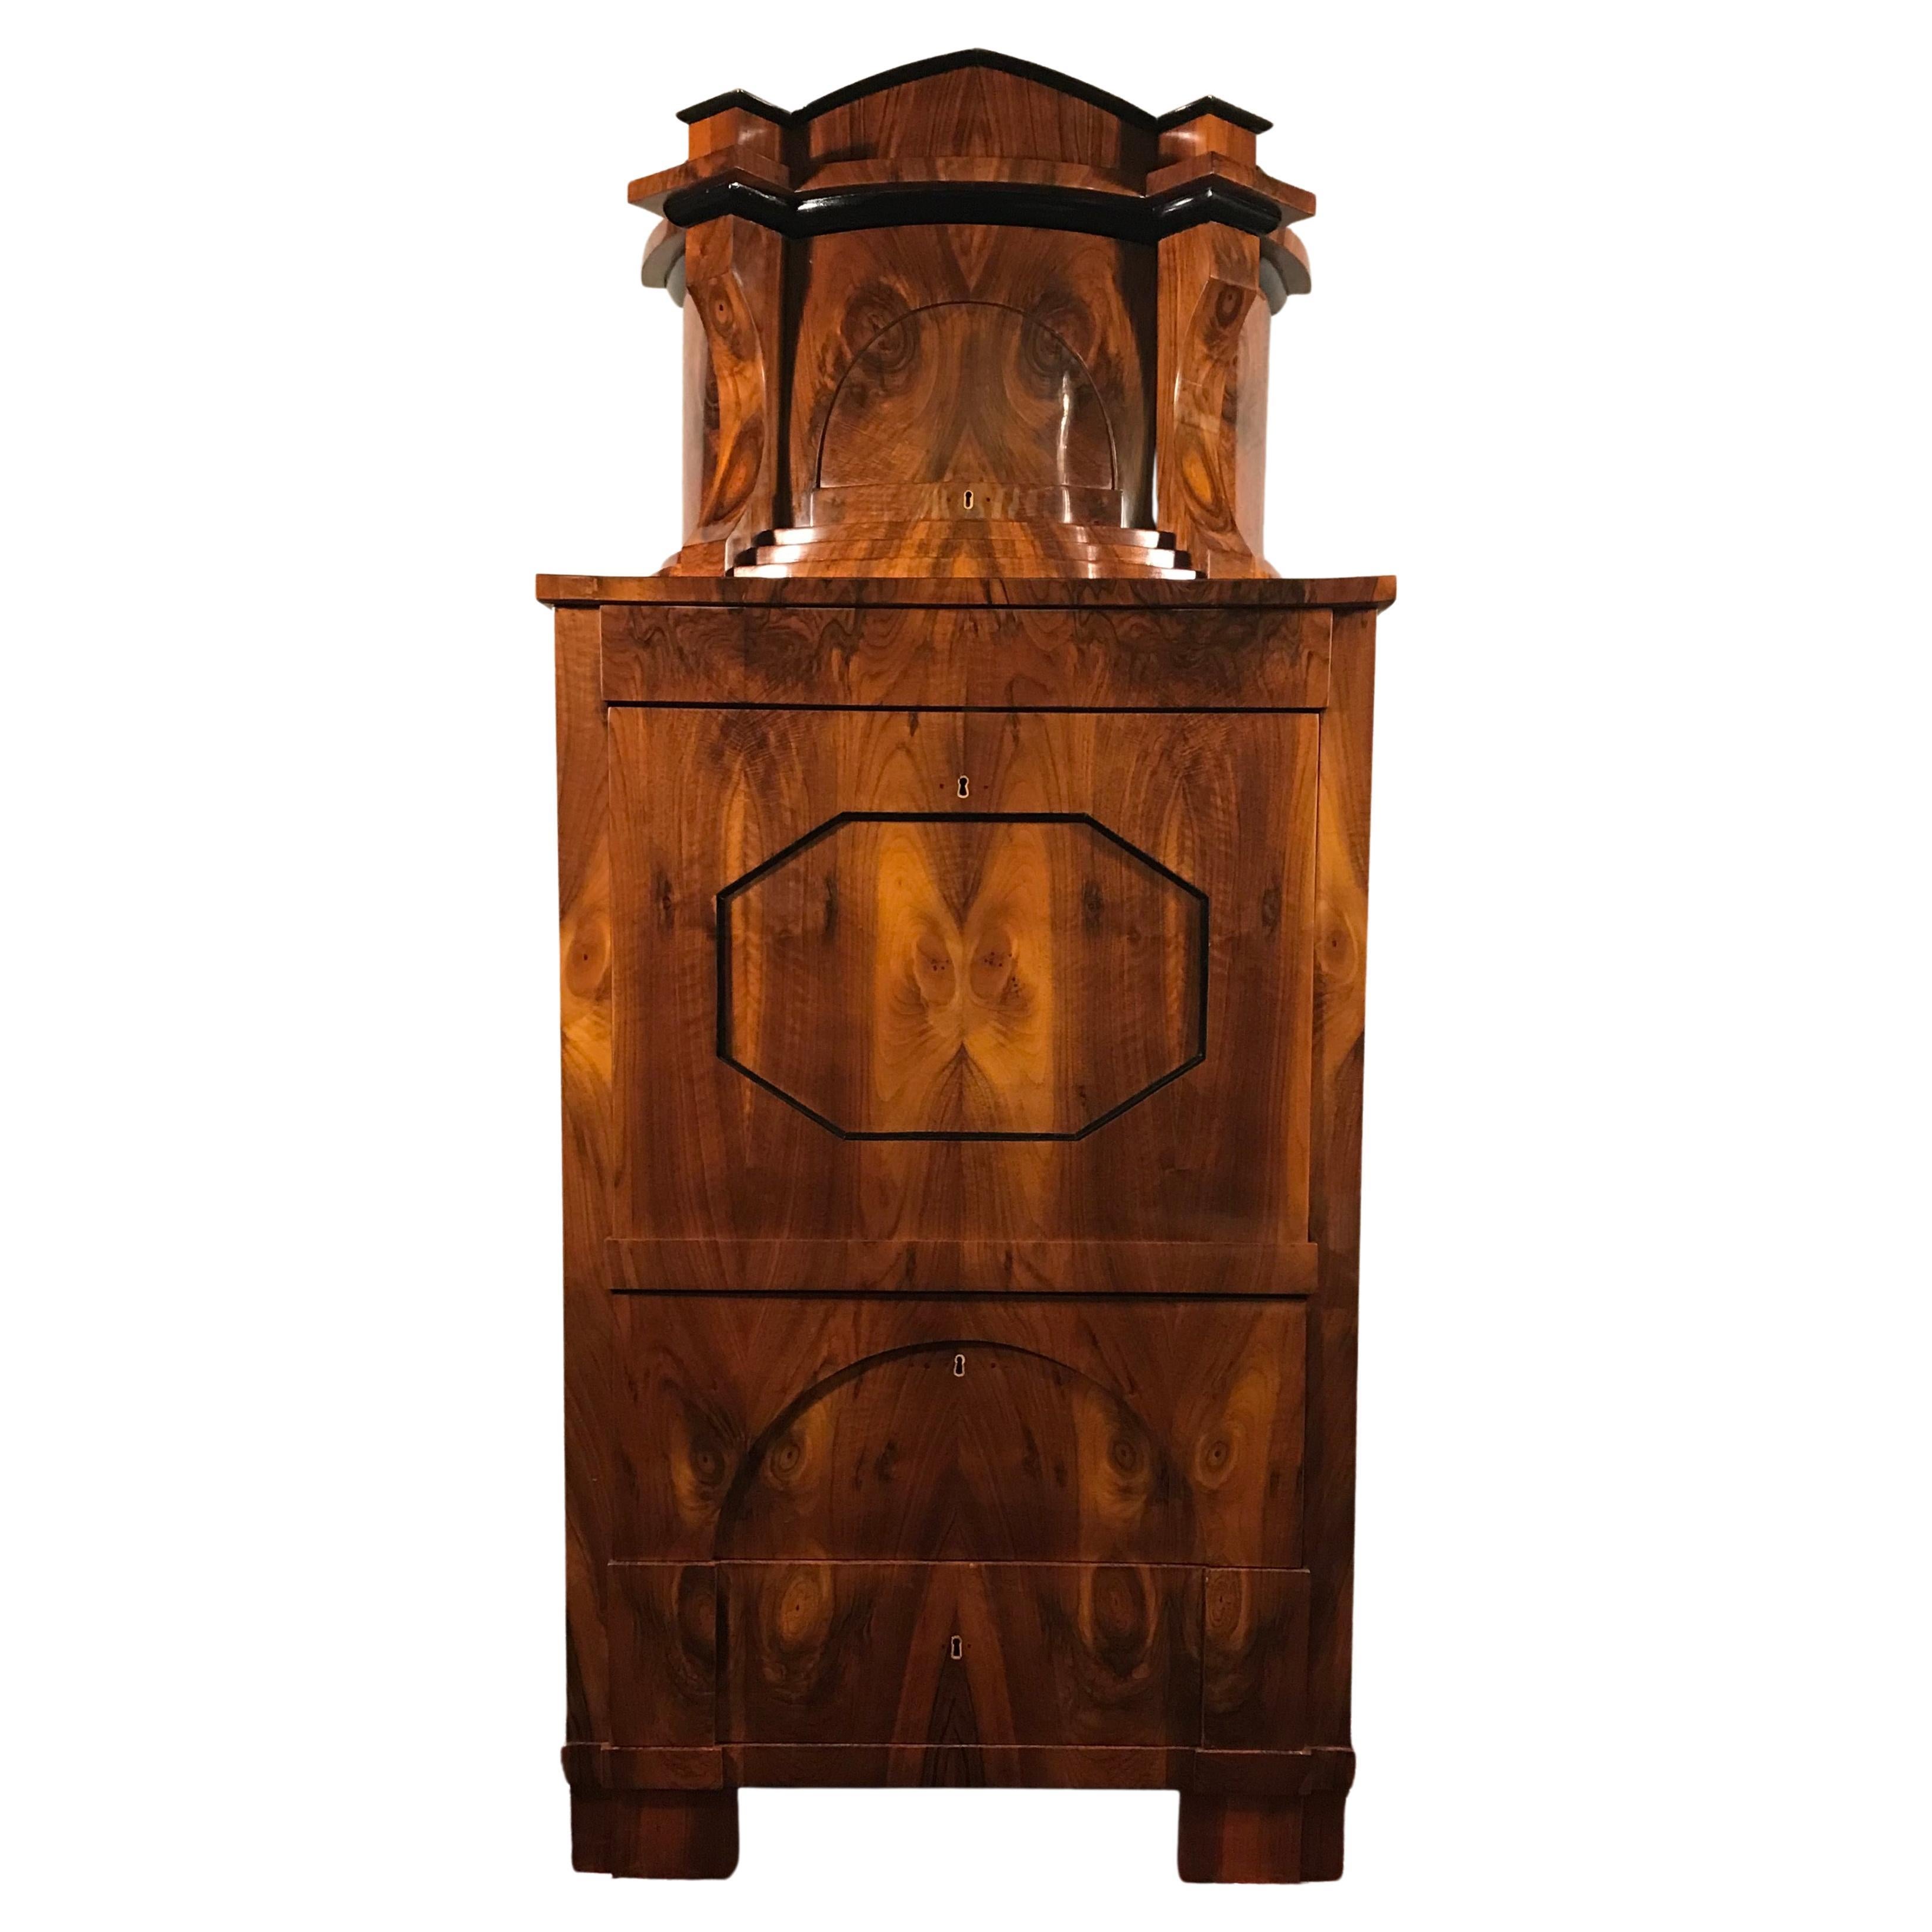 This extraordinary Biedermeier secretary desk dates back to around 1820 and comes from southern Germany. The unique desk has a very pretty walnut veneer on the outside, with a beautifully designed mirroring veneer pattern. The secretary desk has